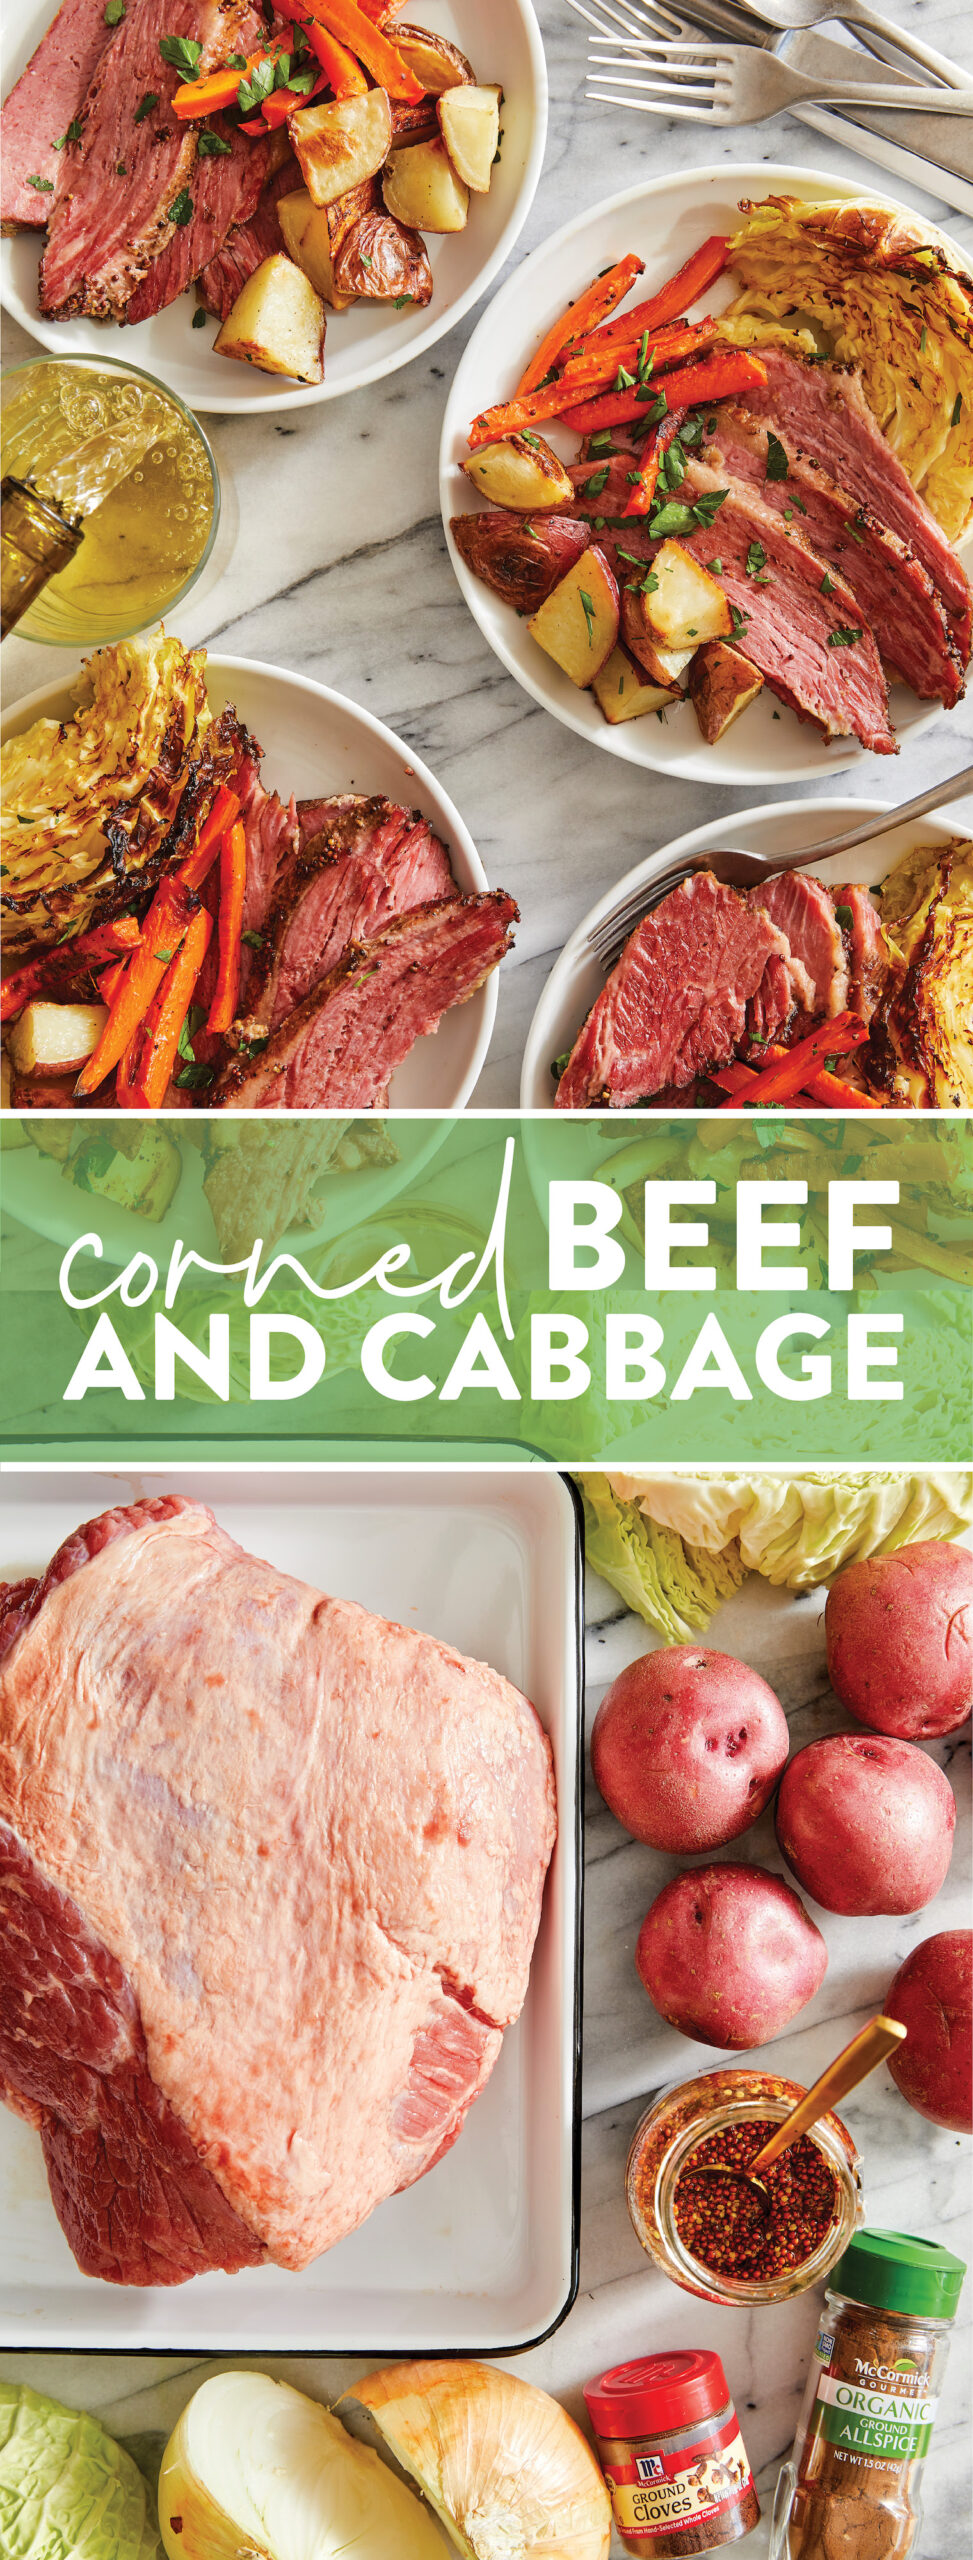 corned-beef-and-cabbage-damn-delicious